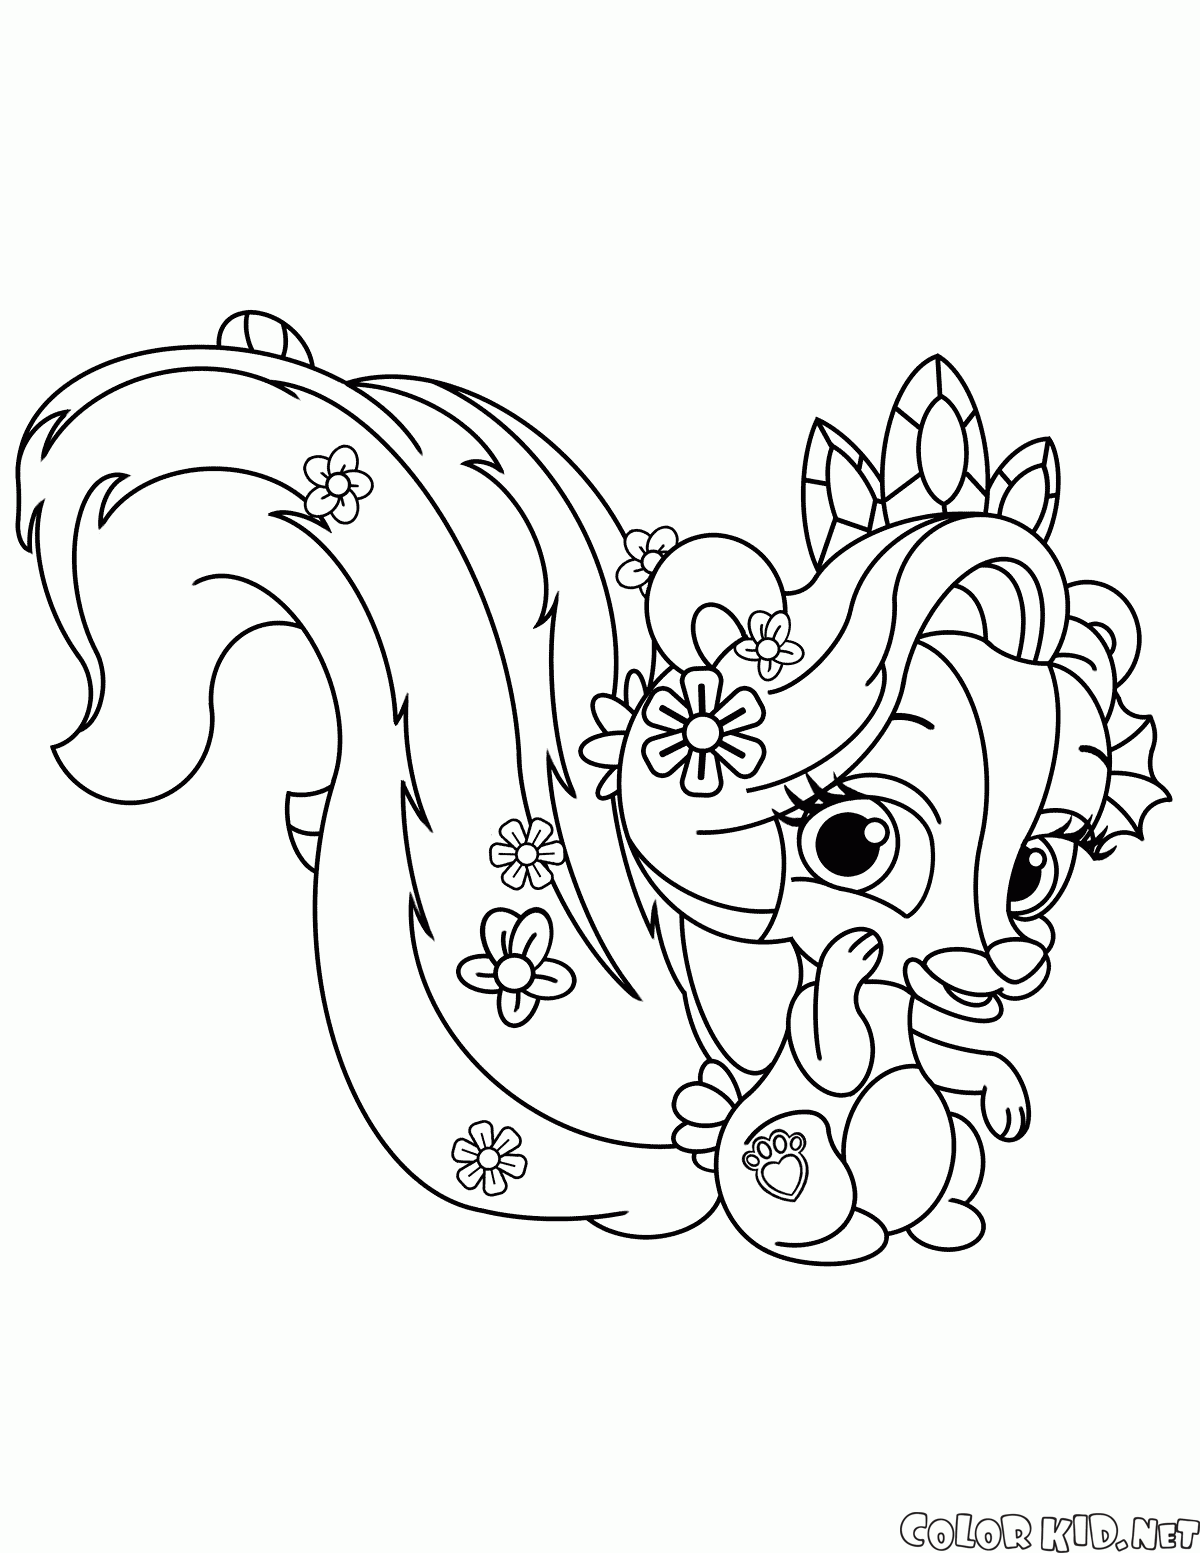 Realistic Skunk Coloring Pages Skunk Coloring Flower The Skunk ...